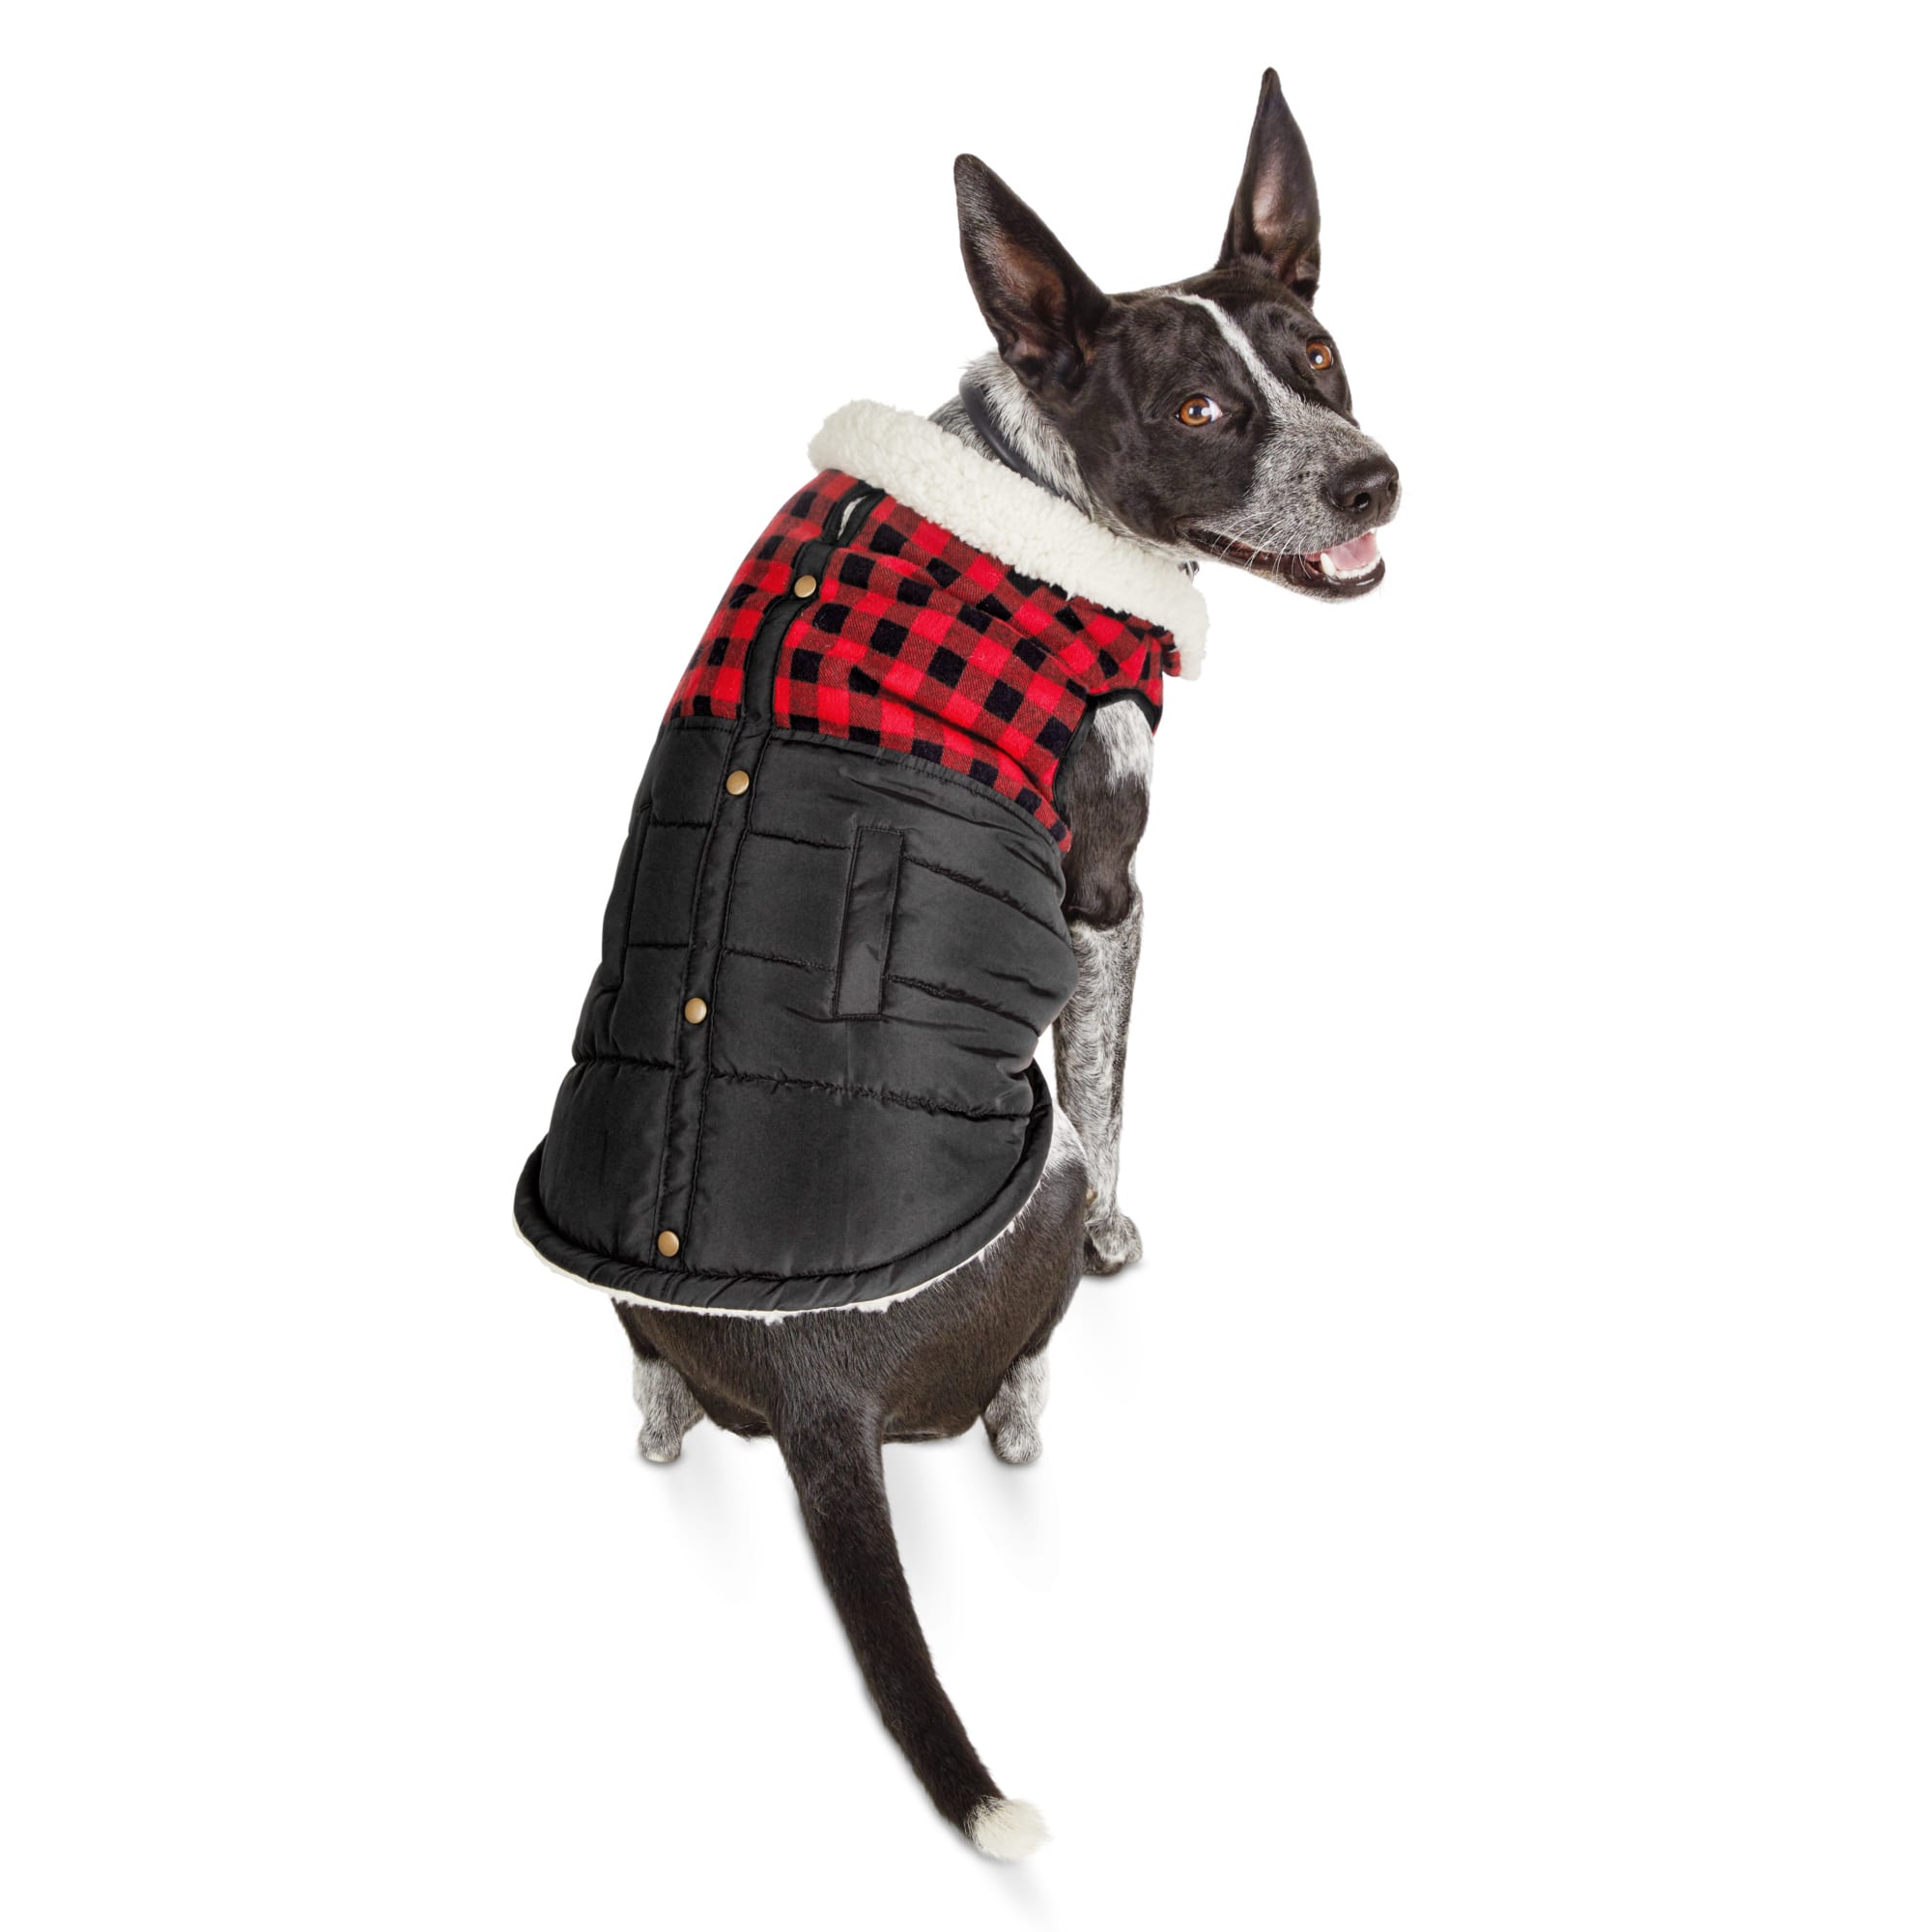 flannel dog sweater